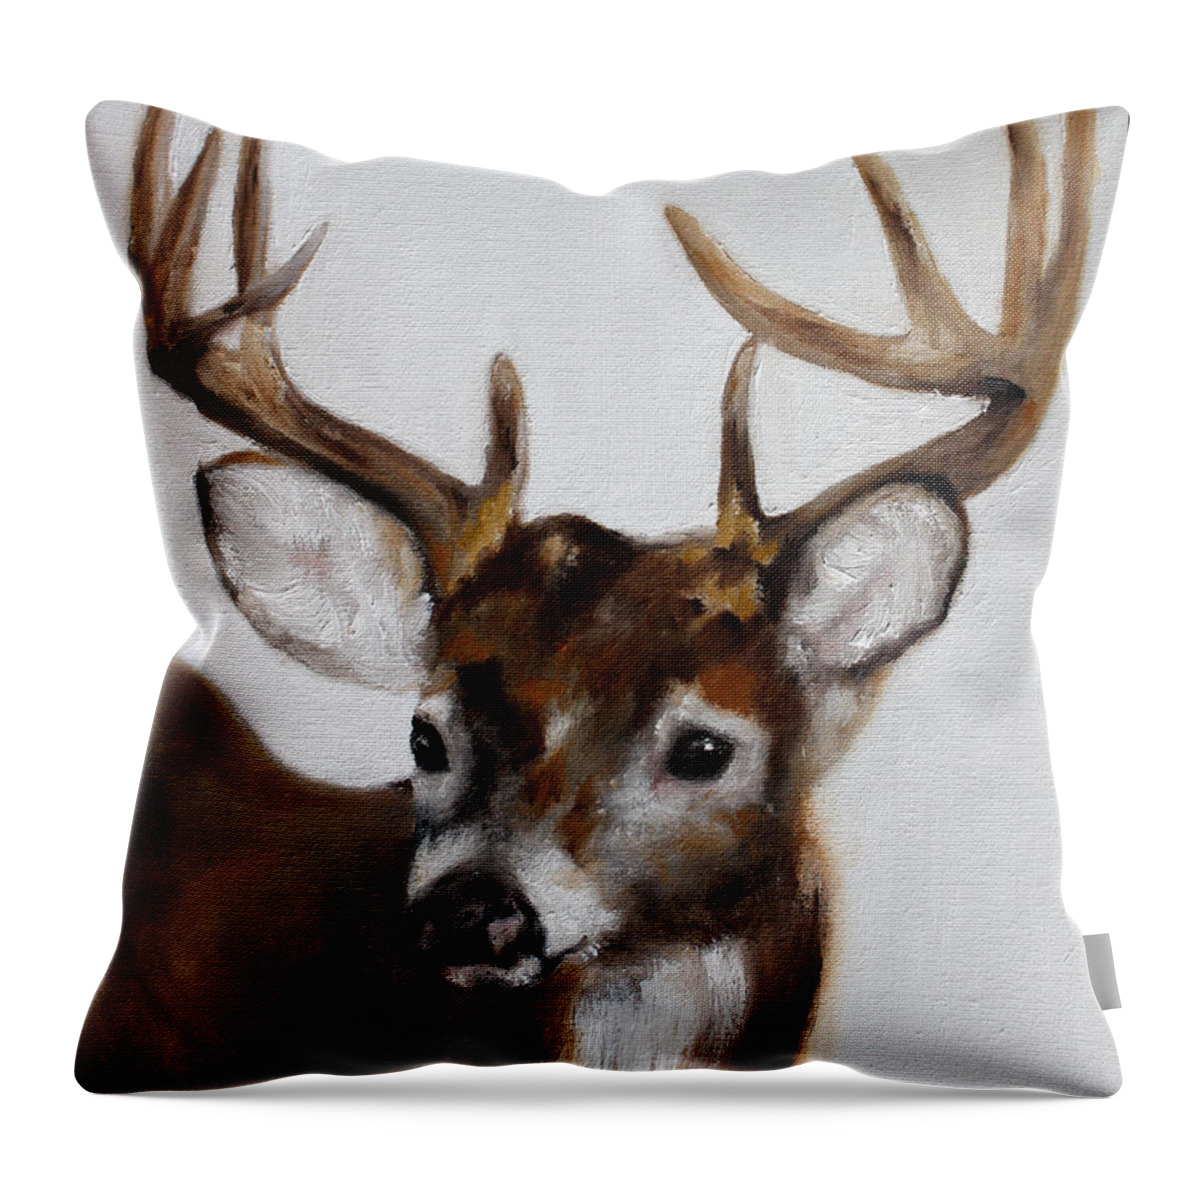 Wildlife Throw Pillow featuring the painting Whitetail Deer by Barbie Batson